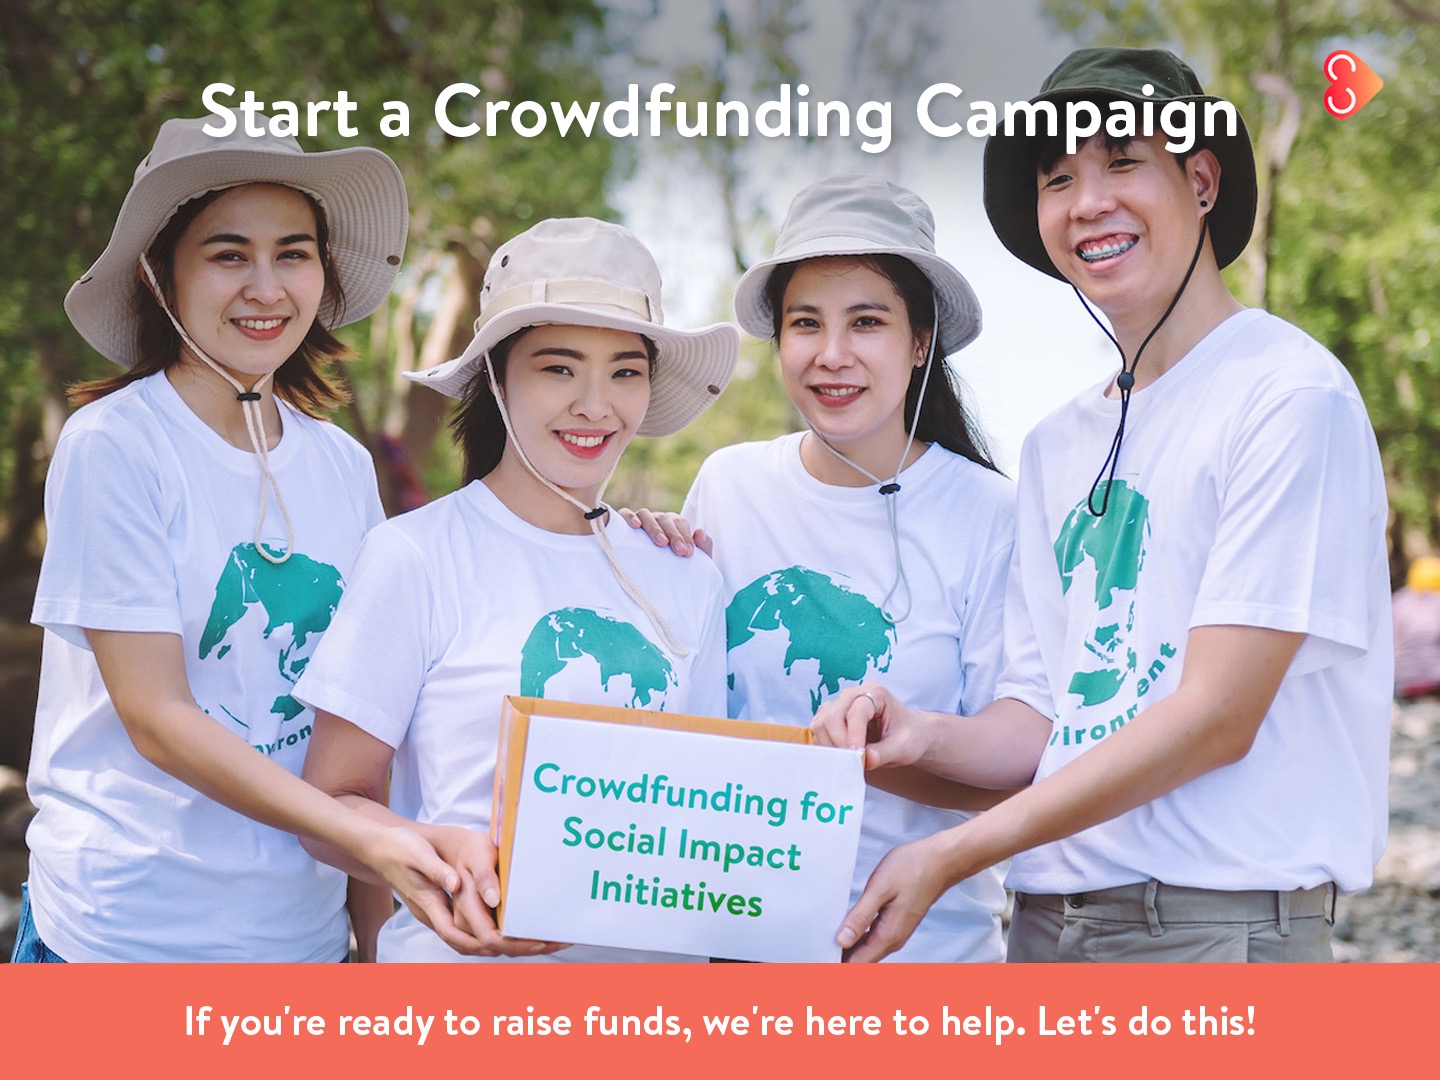 StartSomeGood exists to support social impact projects, enterprises